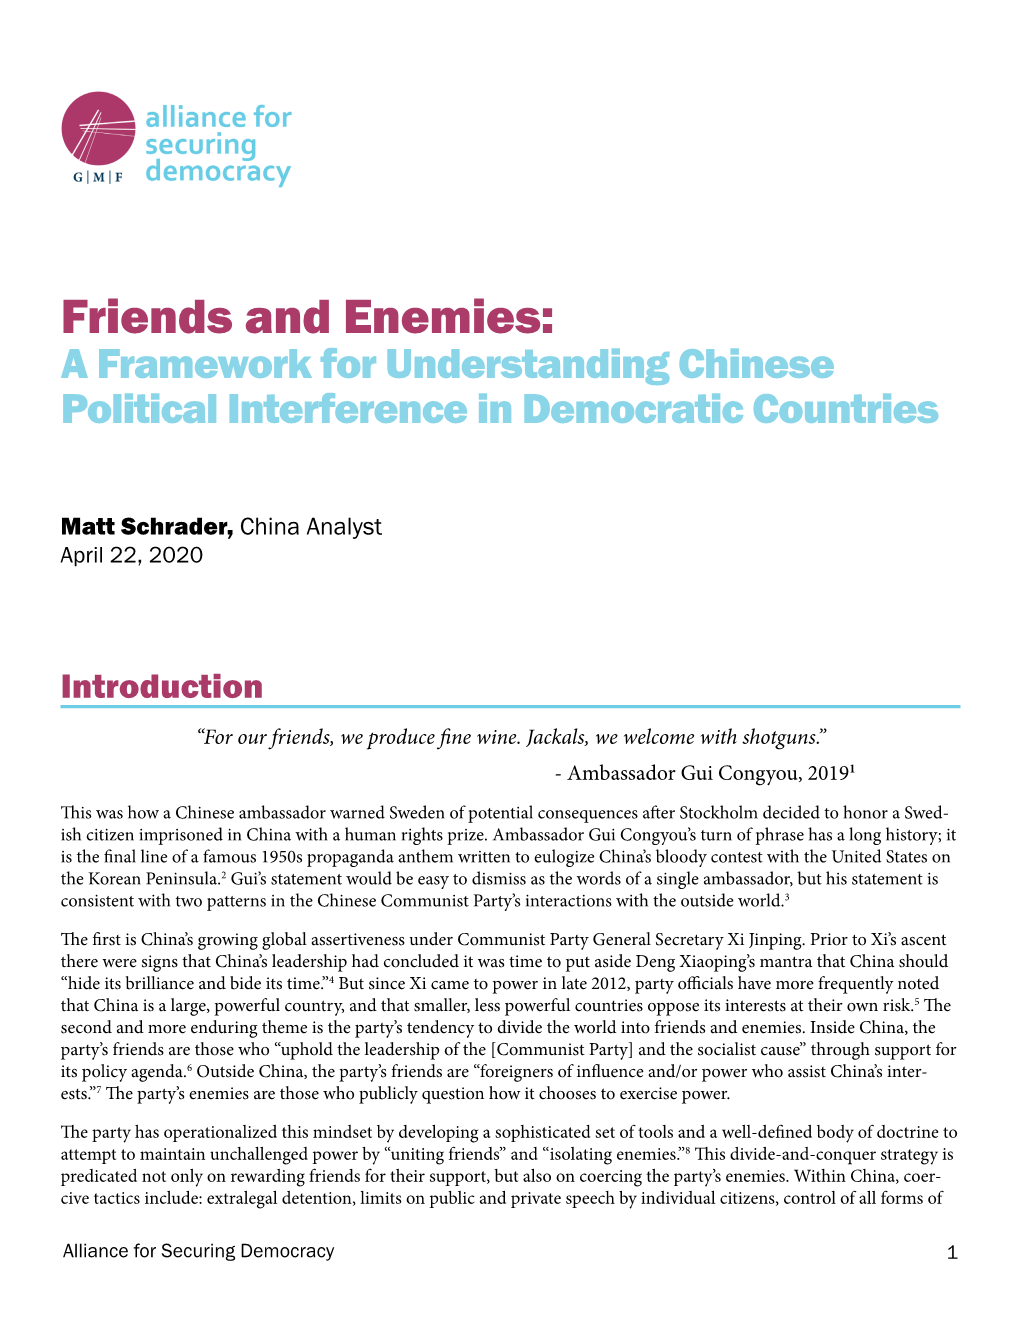 Friends and Enemies: a Framework for Understanding Chinese Political Interference in Democratic Countries